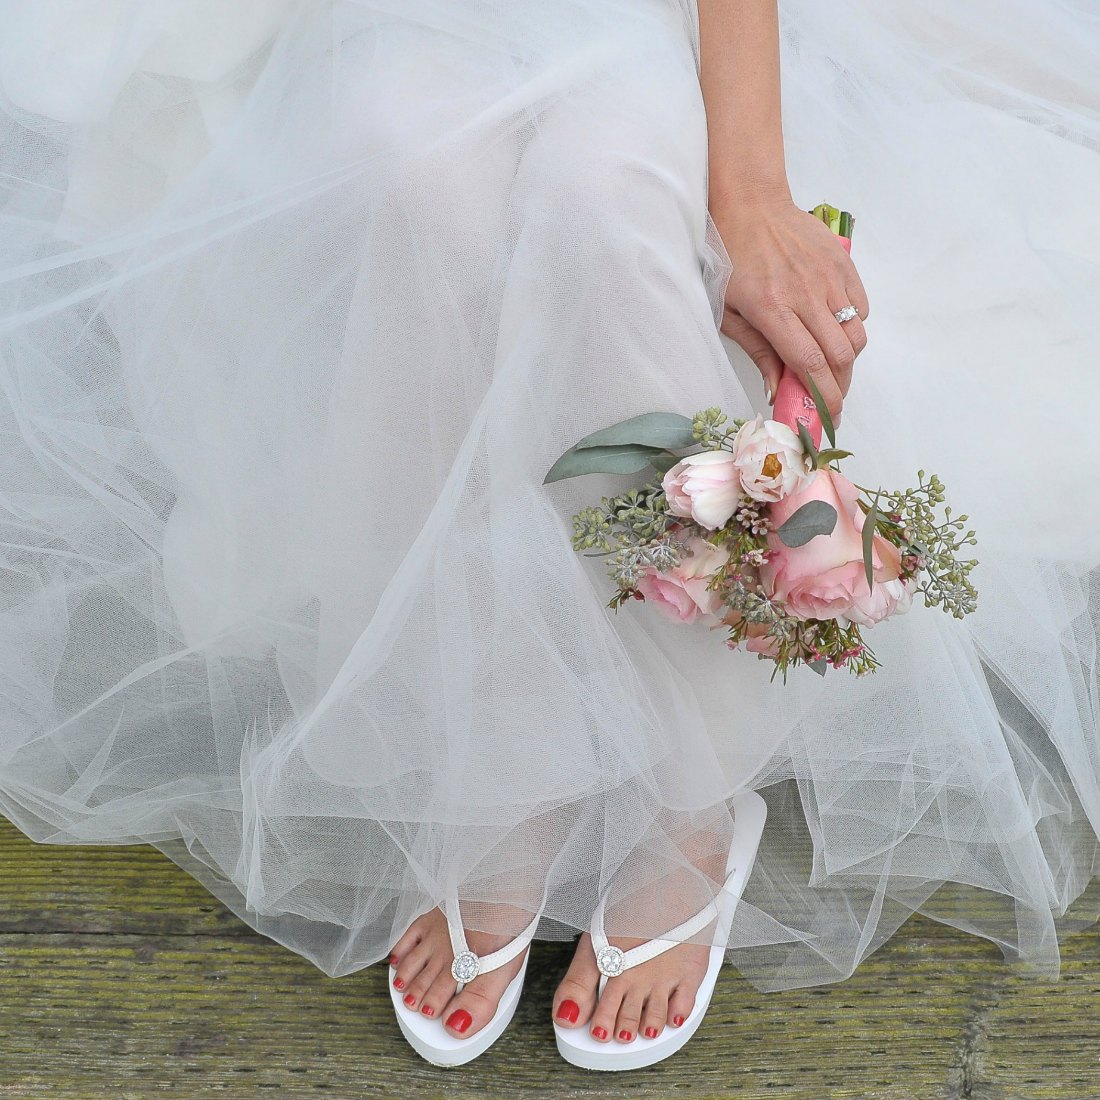 Are Flip Flops A Hit At A Wedding? Or Are They Simply A Flop? ~ Oh My Veil